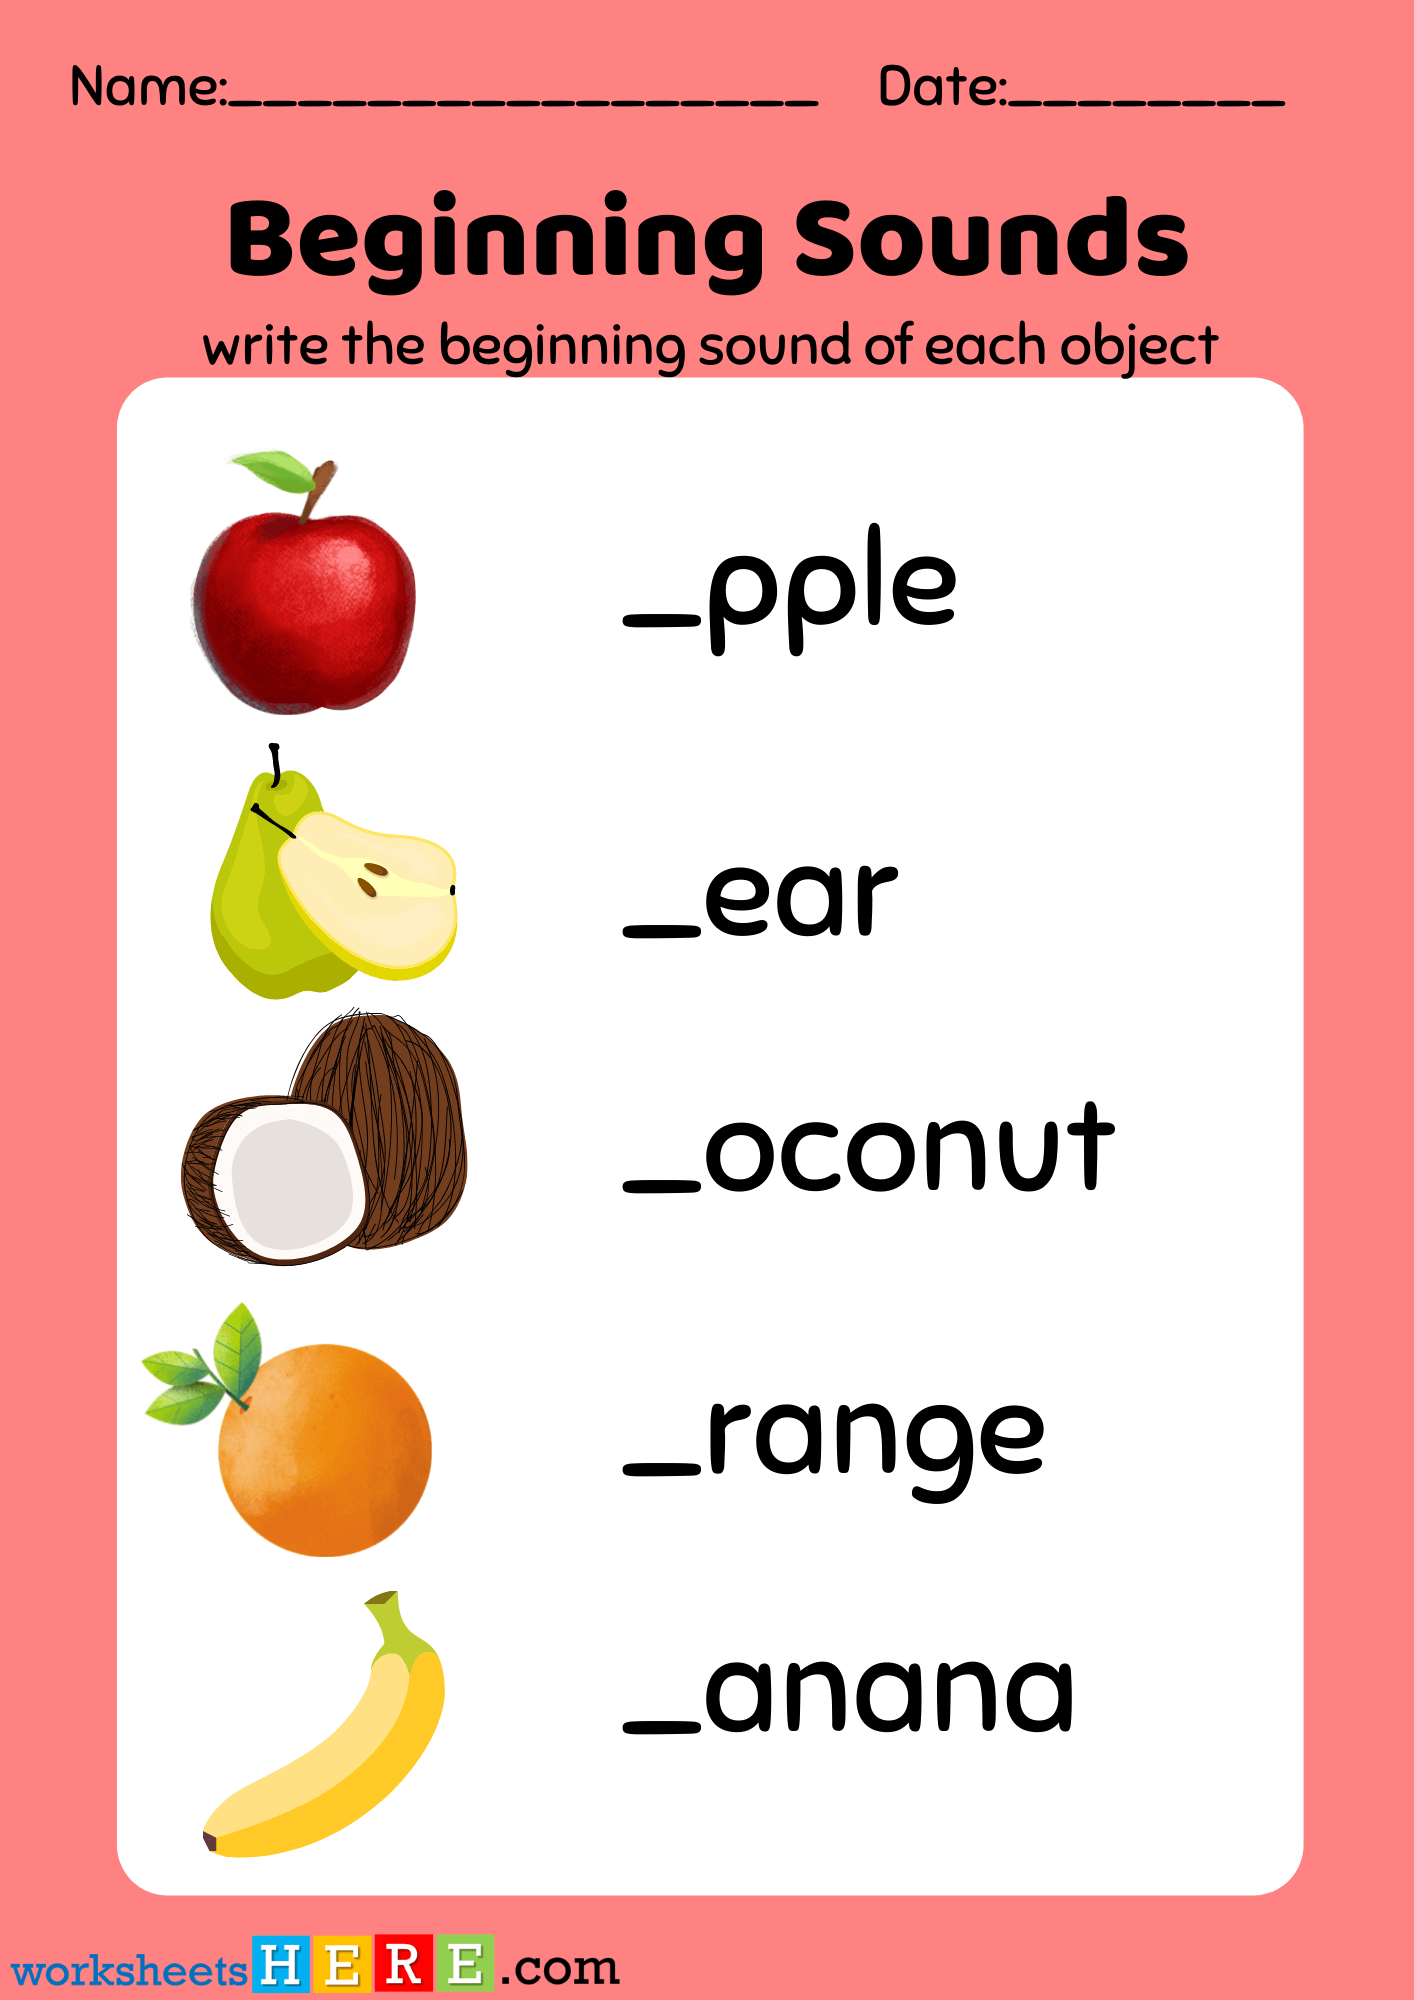 Beginning Sounds Exercises with Fruits Pictures PDF Worksheet For Kids